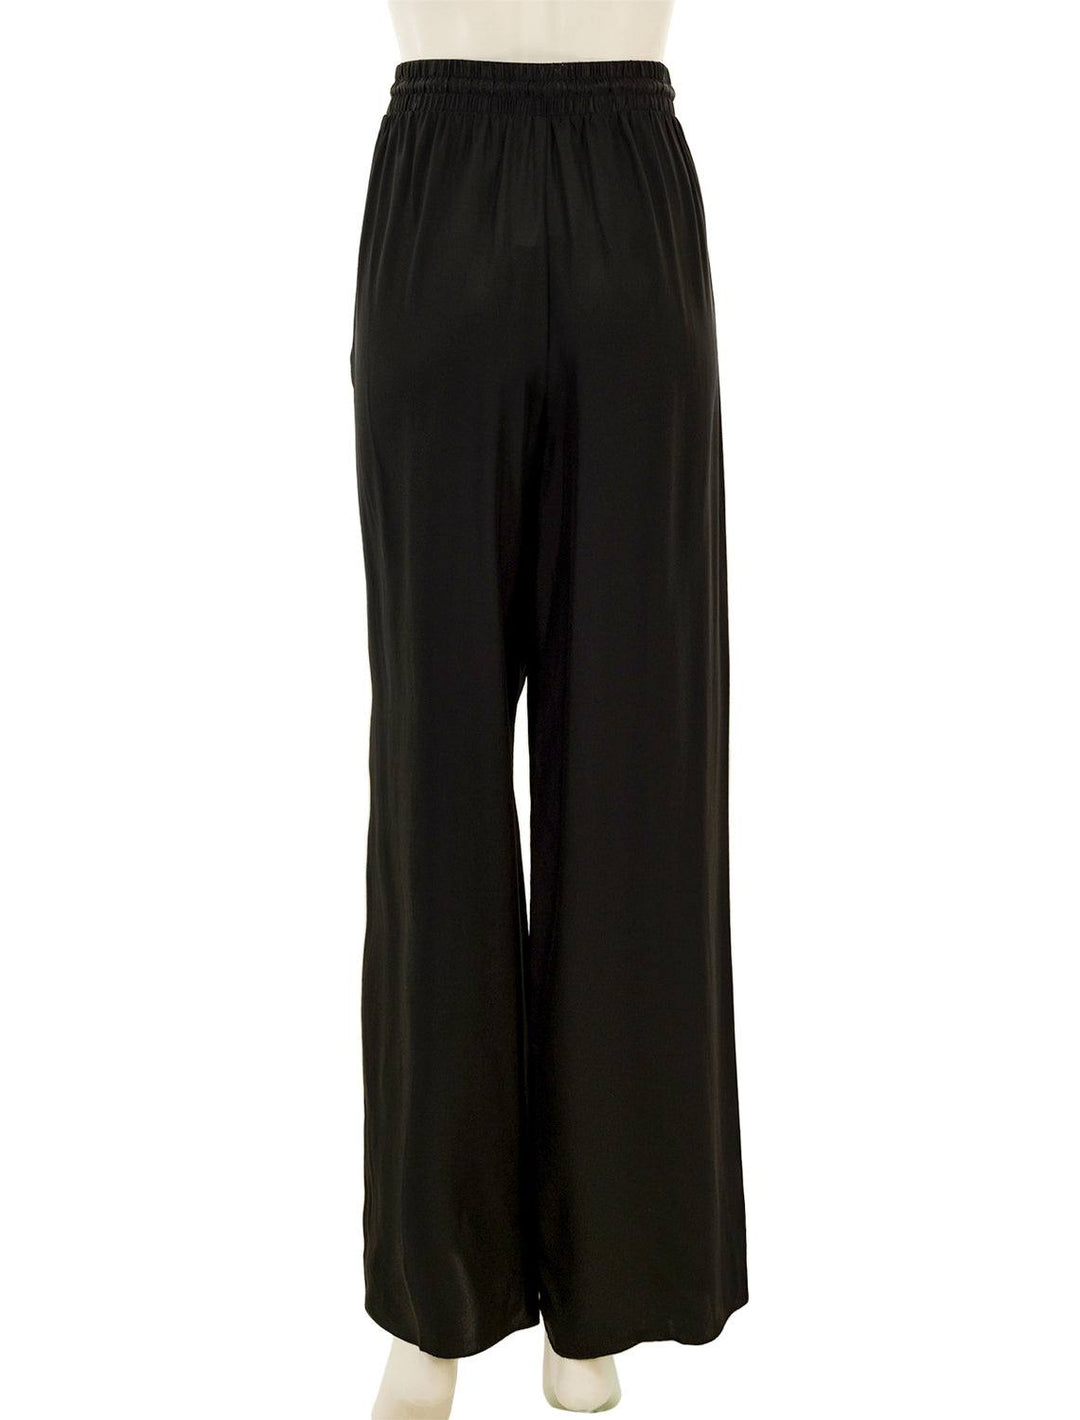 Back view of ATM's wide leg silk pant in black.